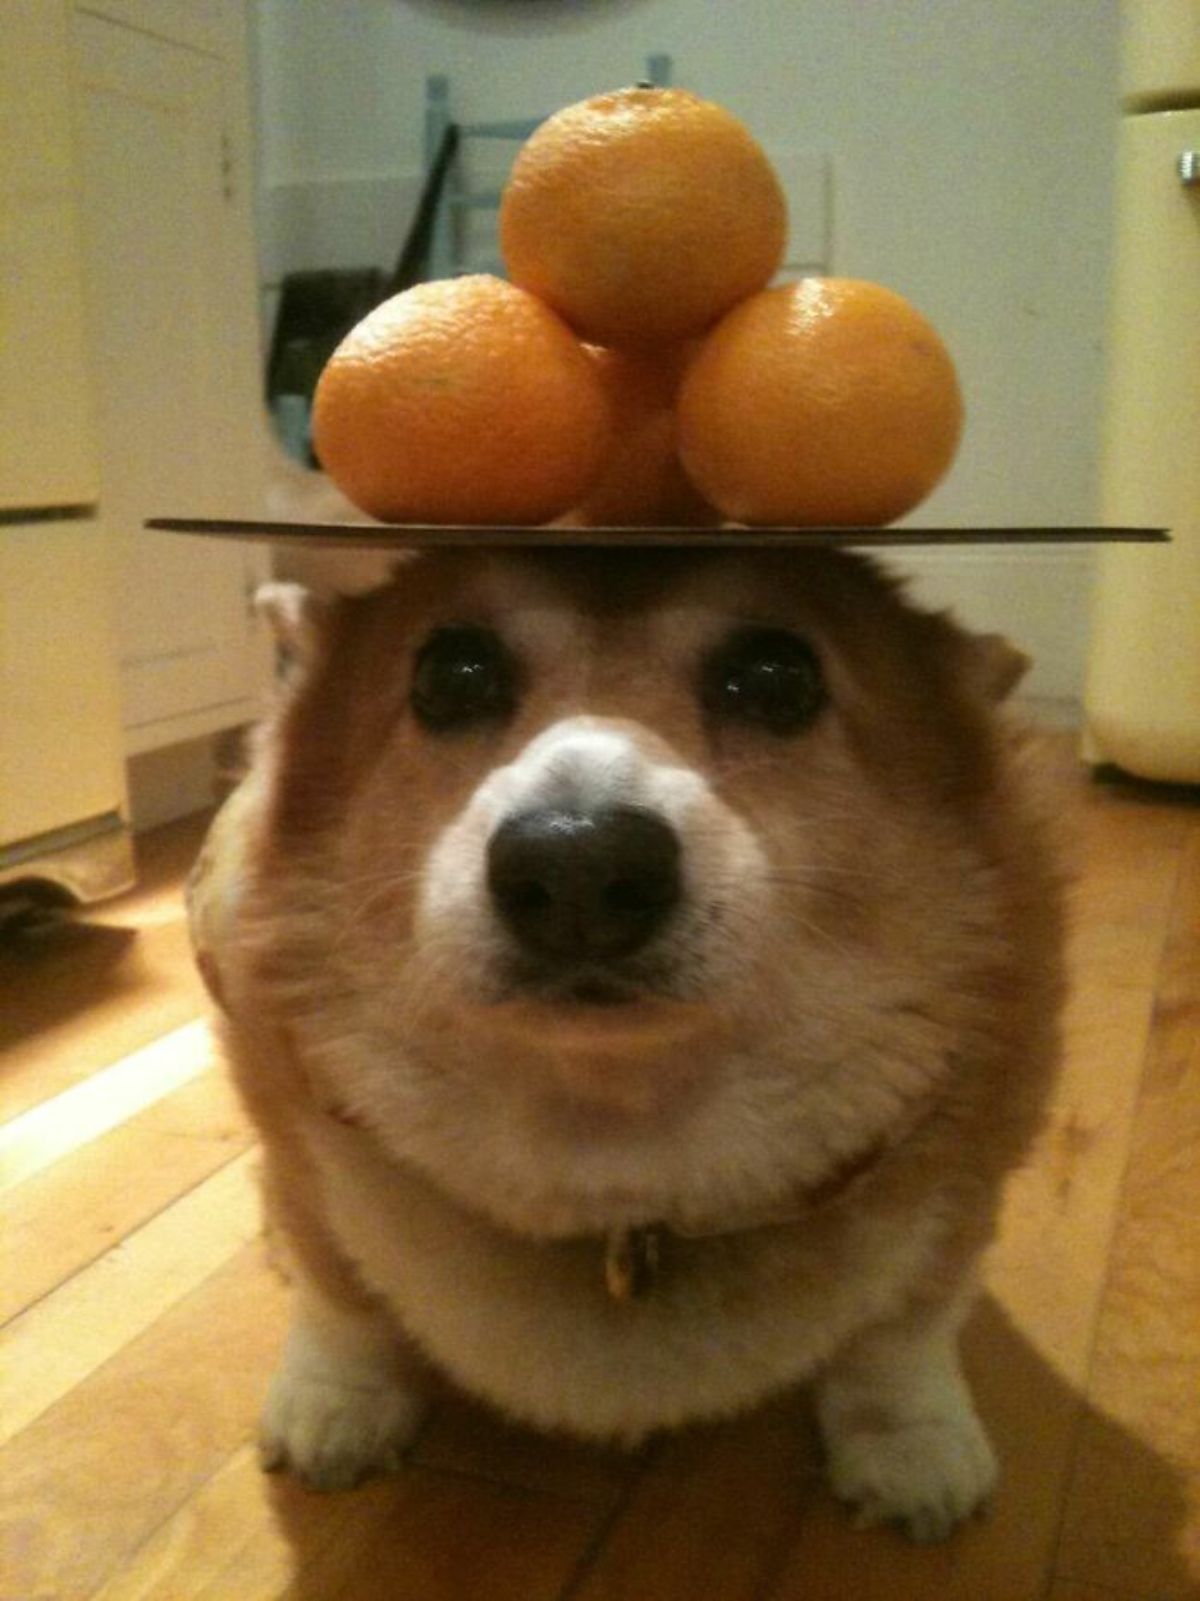 brown and white corgi sitting with a tray of oranges on its head